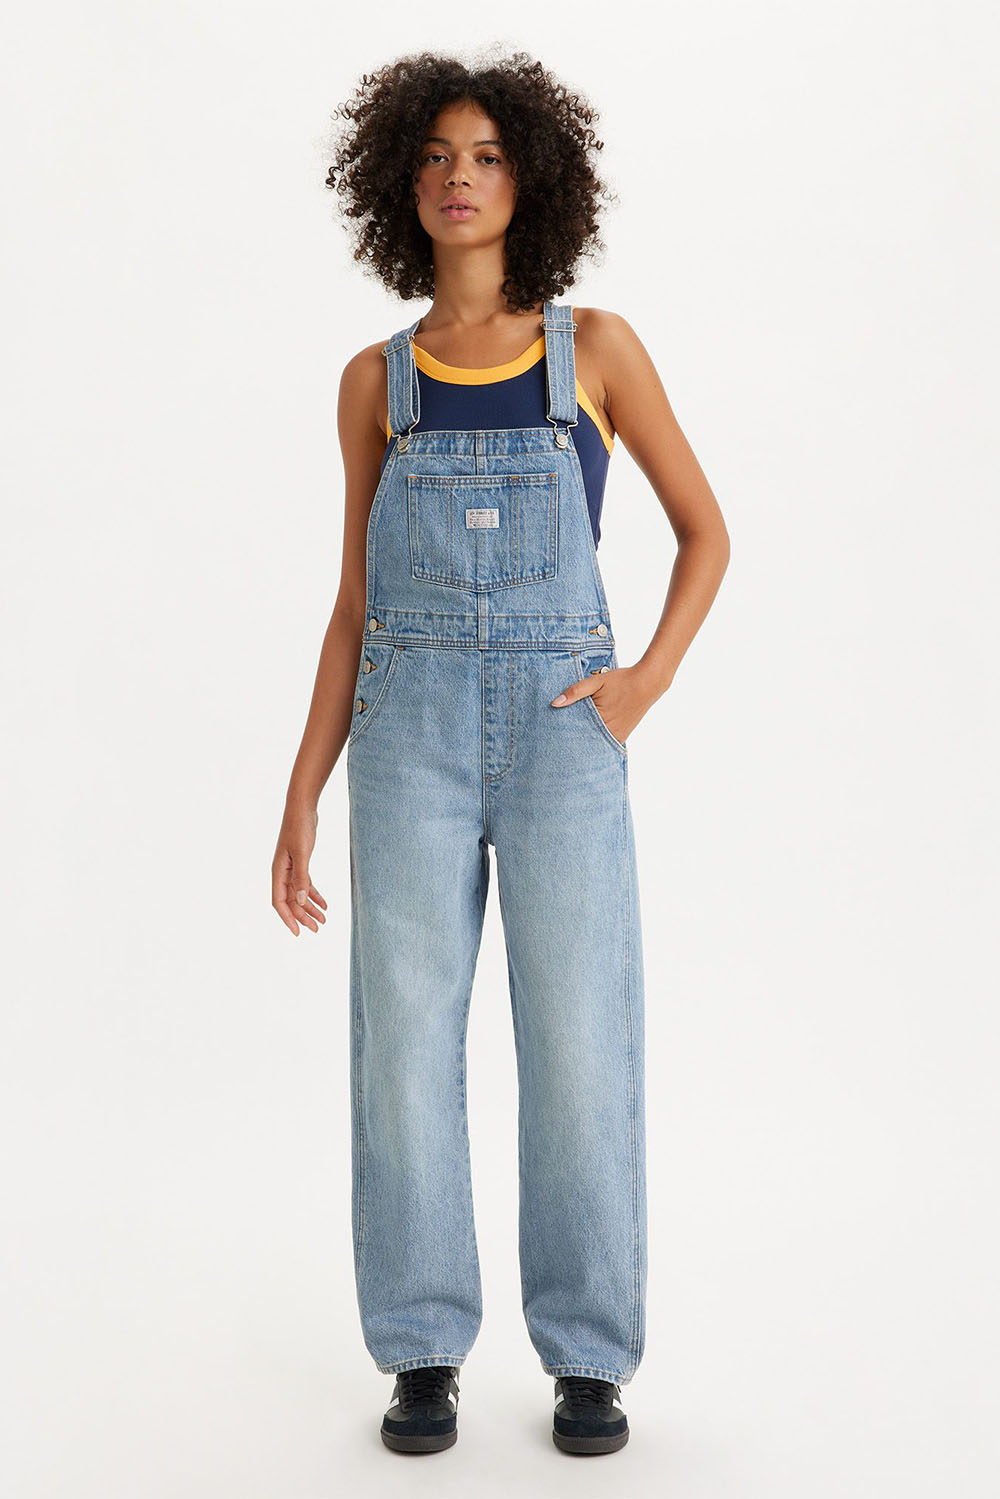 Levis - Vintage Overall - What A Delight - Front